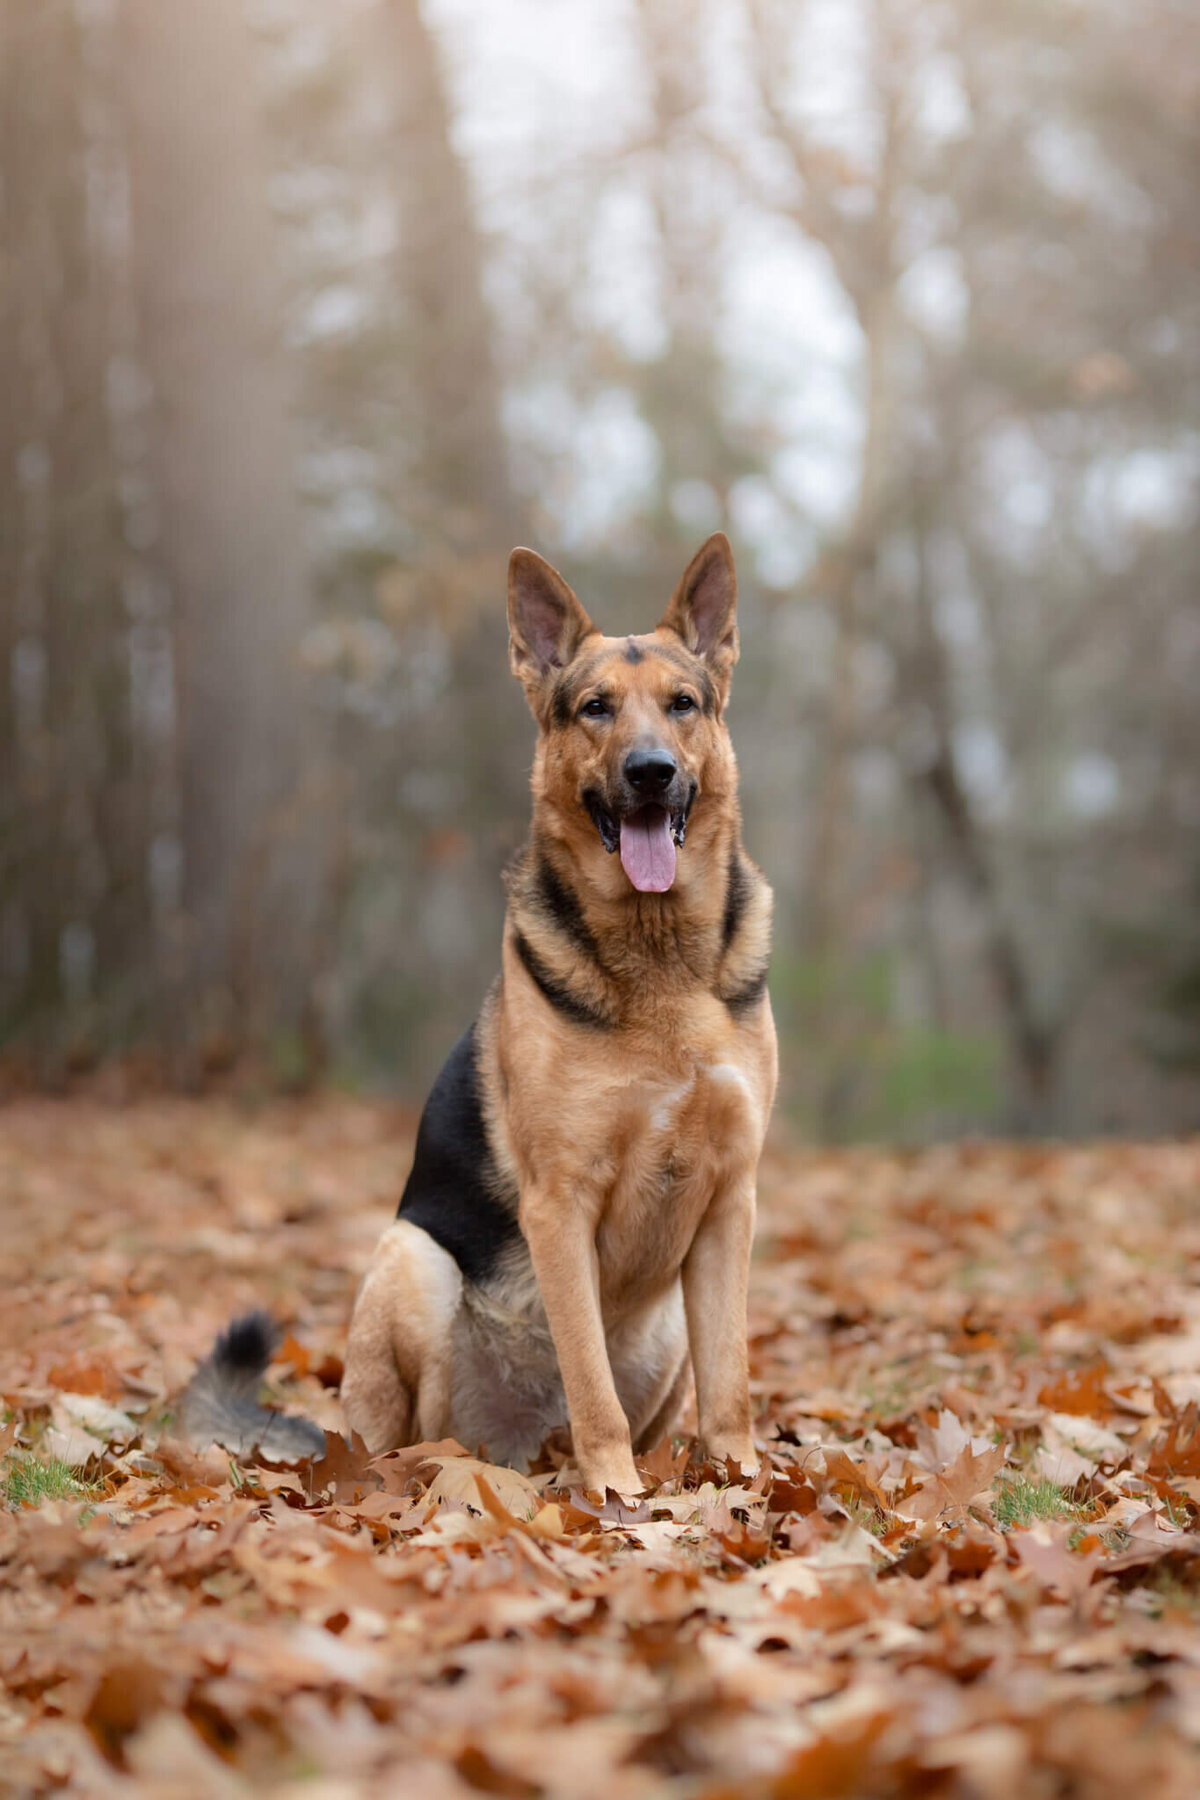 Handsome German Shepard sitting in a Worcester area forest in the fall leaves